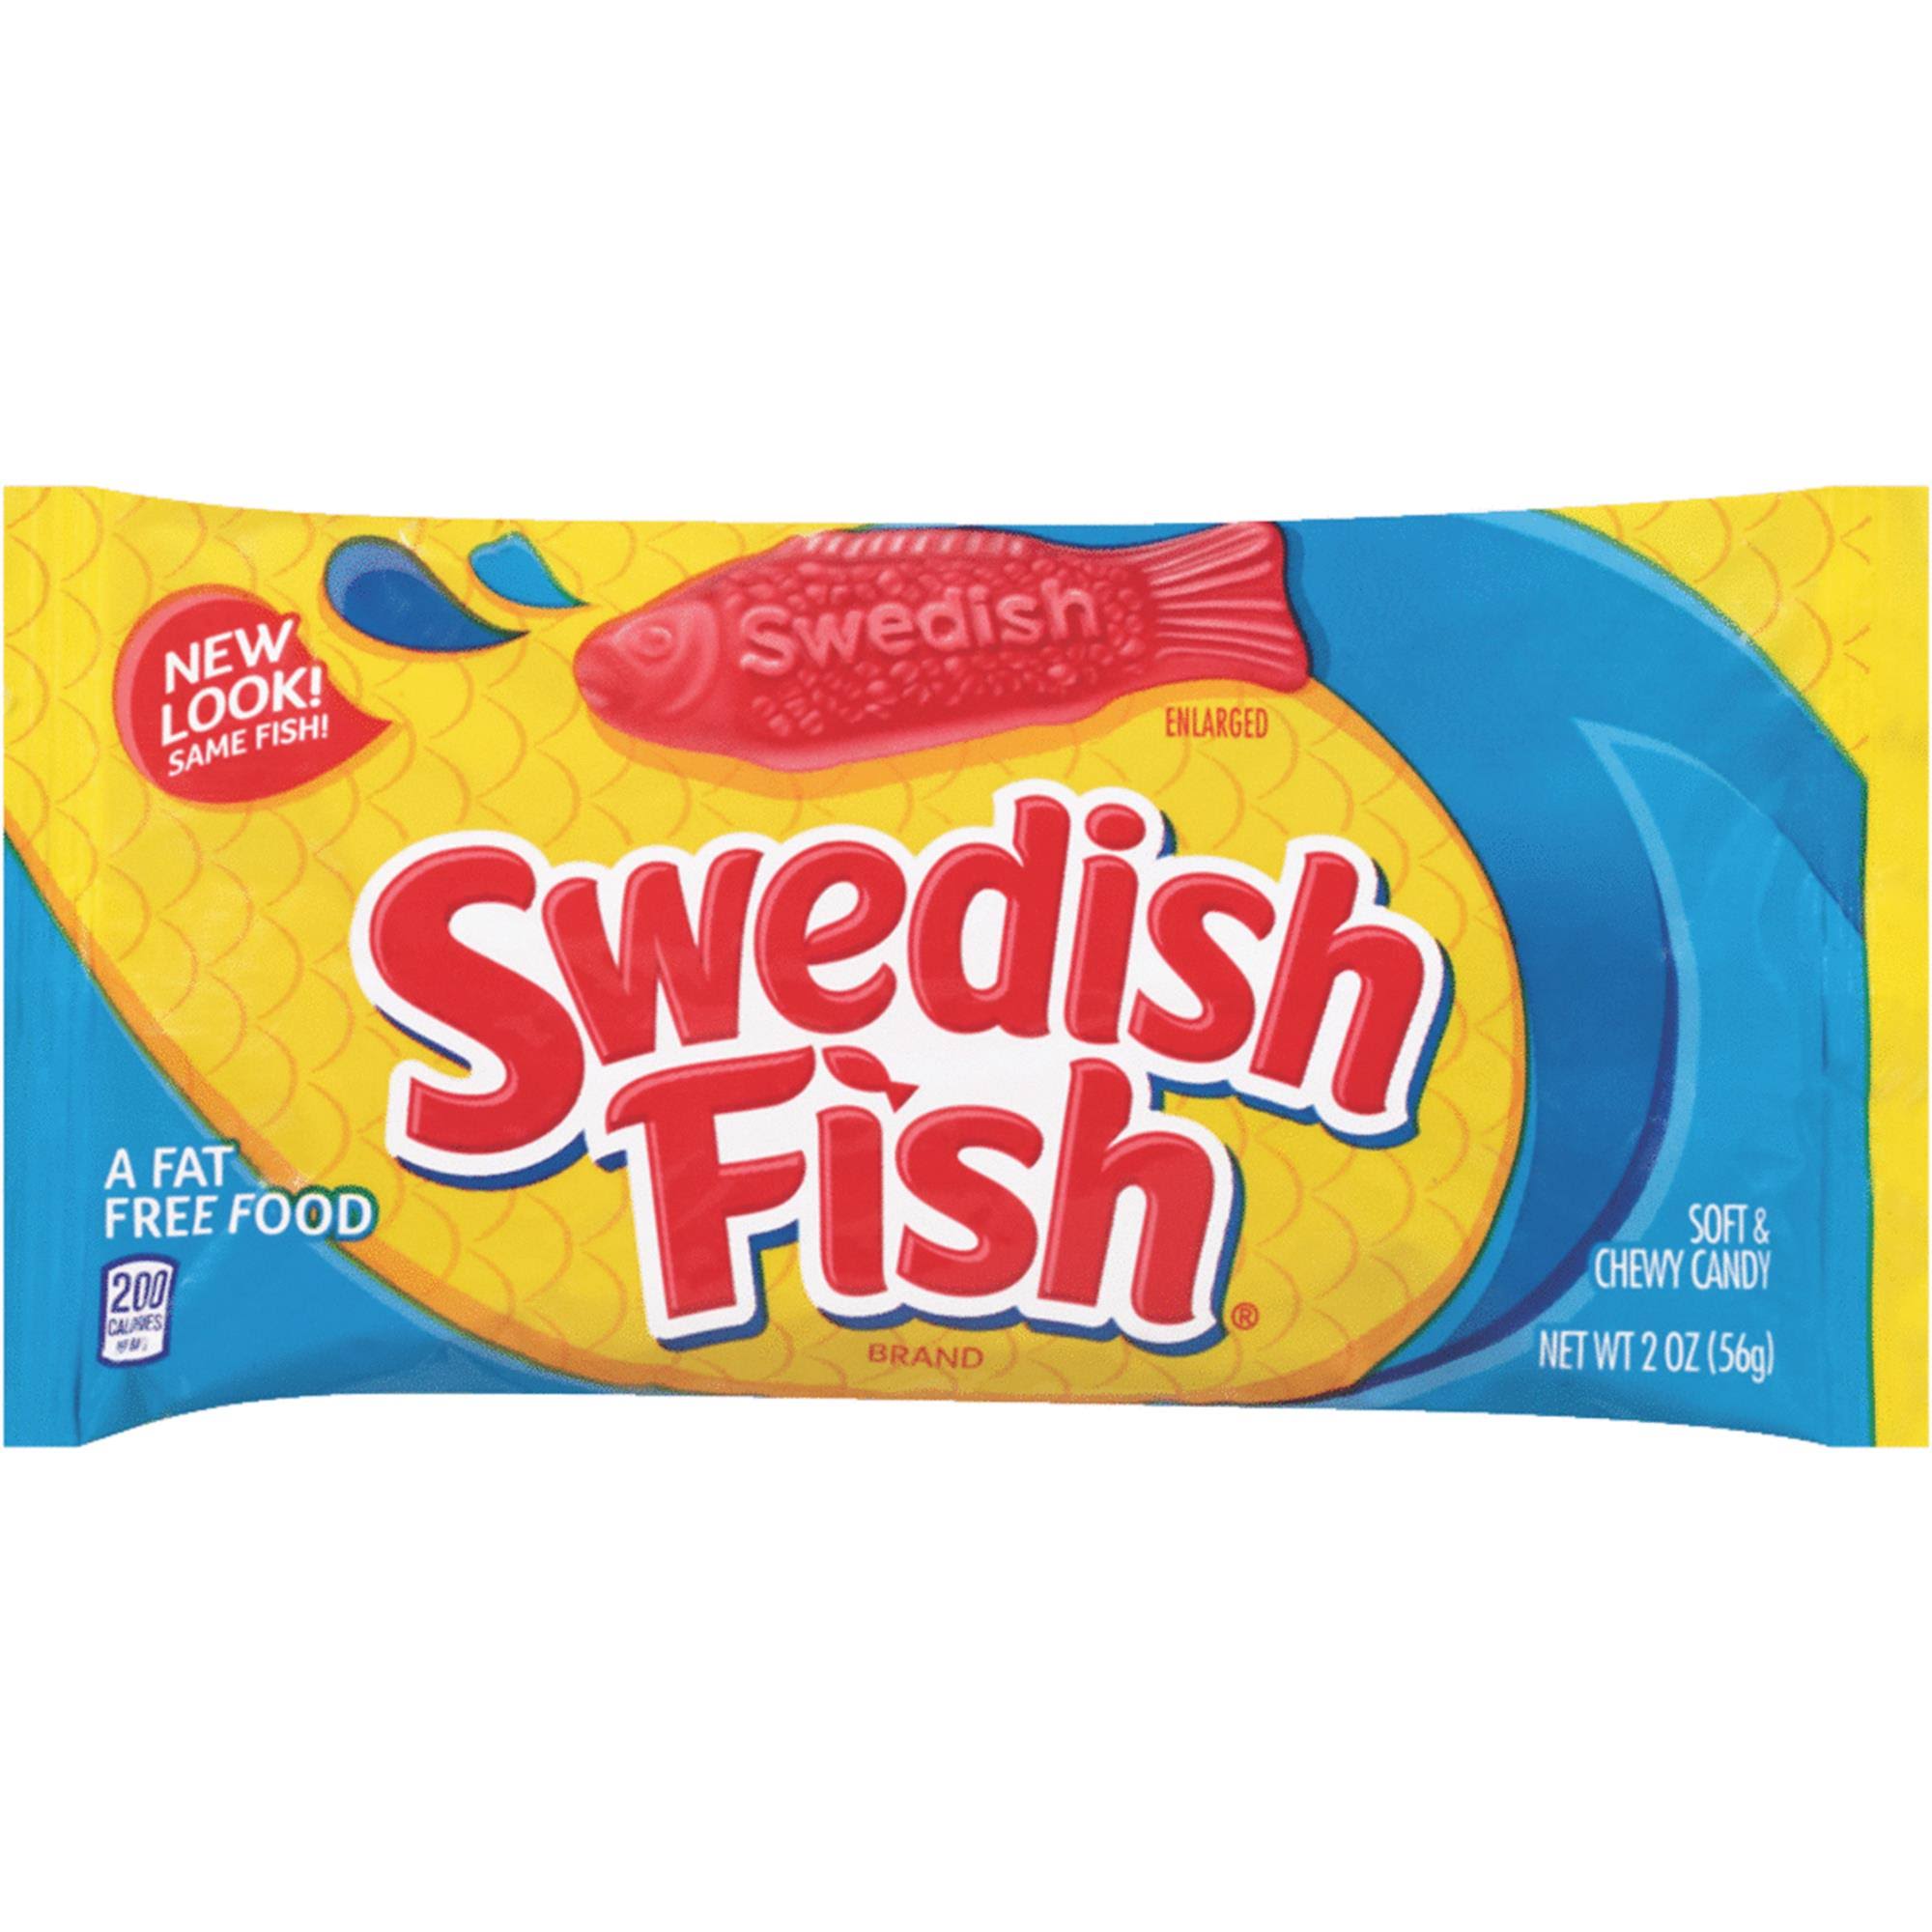 Swedish Fish Red Fish Soft and Chewy Candy - 2oz